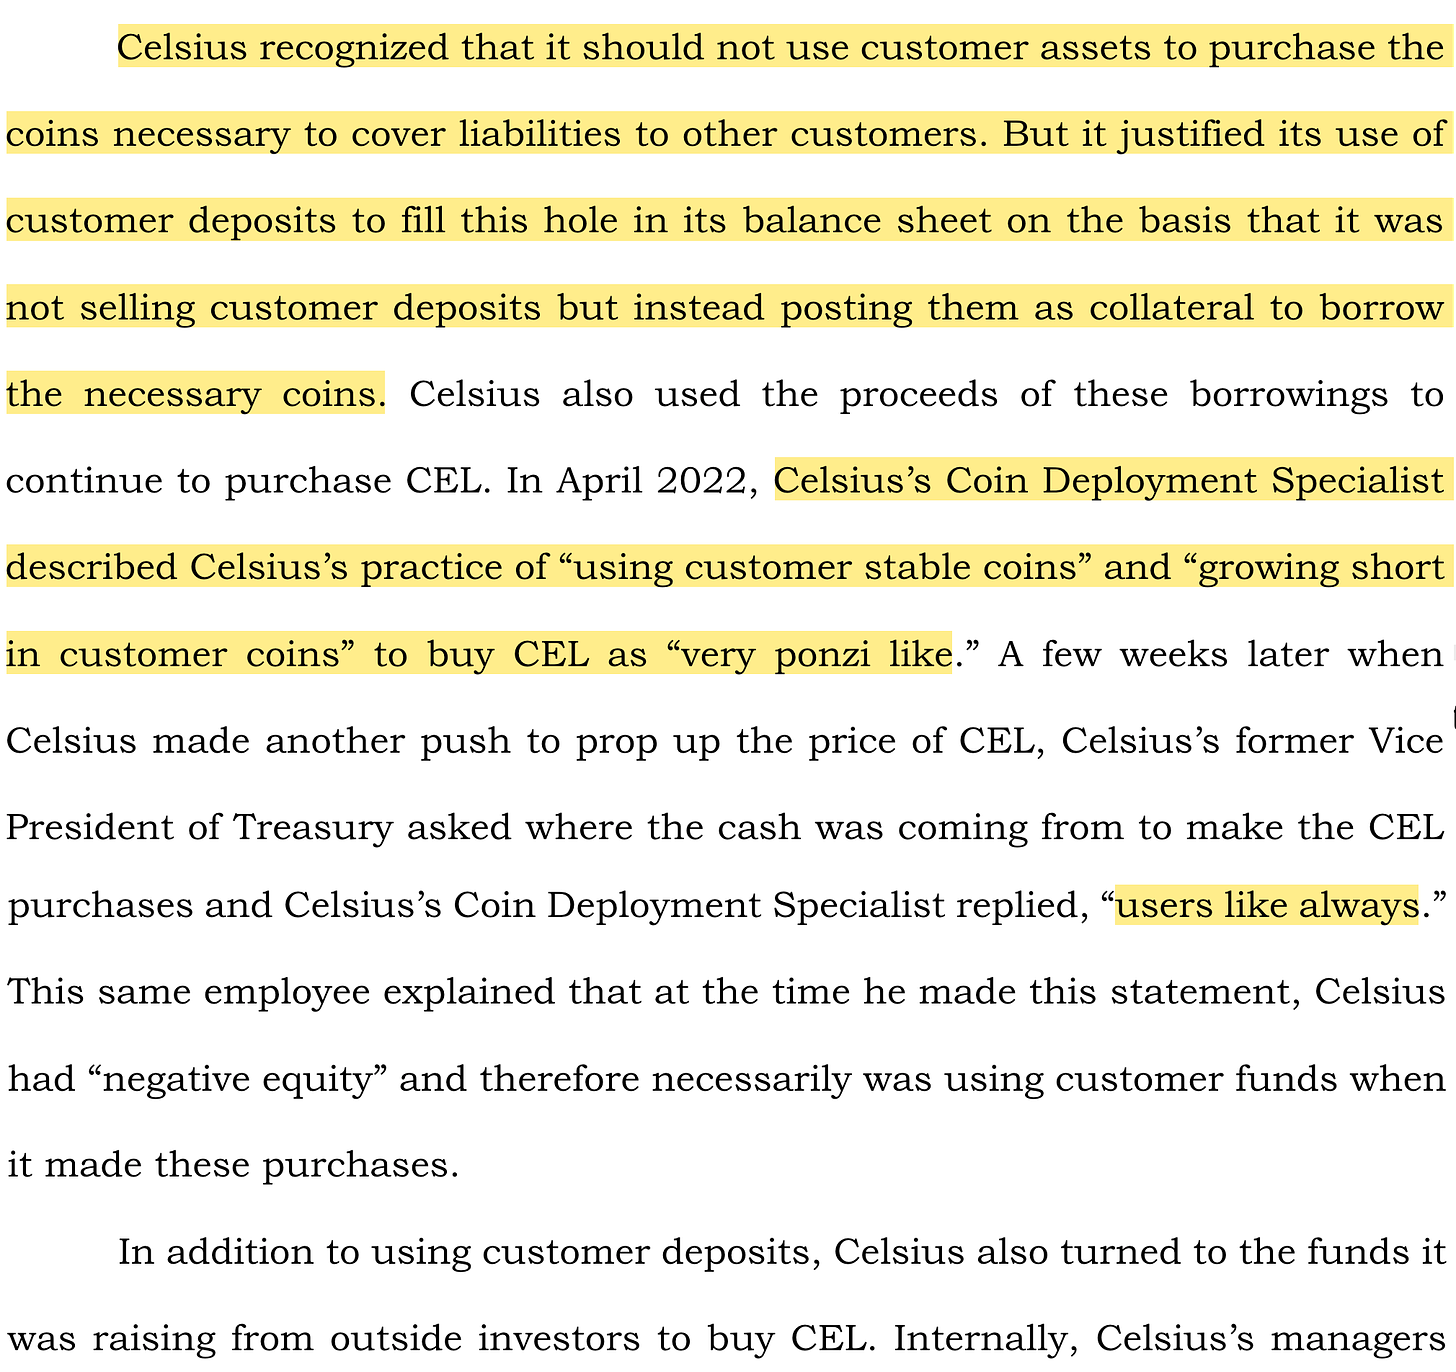 Celsius recognized that it should not use customer assets to purchase the coins necessary to cover liabilities to other customers. But it justified its use of customer deposits to fill this hole in its balance sheet on the basis that it was not selling customer deposits but instead posting them as collateral to borrow the necessary coins. Celsius also used the proceeds of these borrowings to continue to purchase CEL. In April 2022, Celsius’s Coin Deployment Specialist described Celsius’s practice of “using customer stable coins” and “growing short in customer coins” to buy CEL as “very ponzi like.” A few weeks later when Celsius made another push to prop up the price of CEL, Celsius’s former Vice President of Treasury asked where the cash was coming from to make the CEL purchases and Celsius’s Coin Deployment Specialist replied, “users like always.” This same employee explained that at the time he made this statement, Celsius had “negative equity” and therefore necessarily was using customer funds when it made these purchases. In addition to using customer deposits, Celsius also turned to the funds it was raising from outside investors to buy CEL.